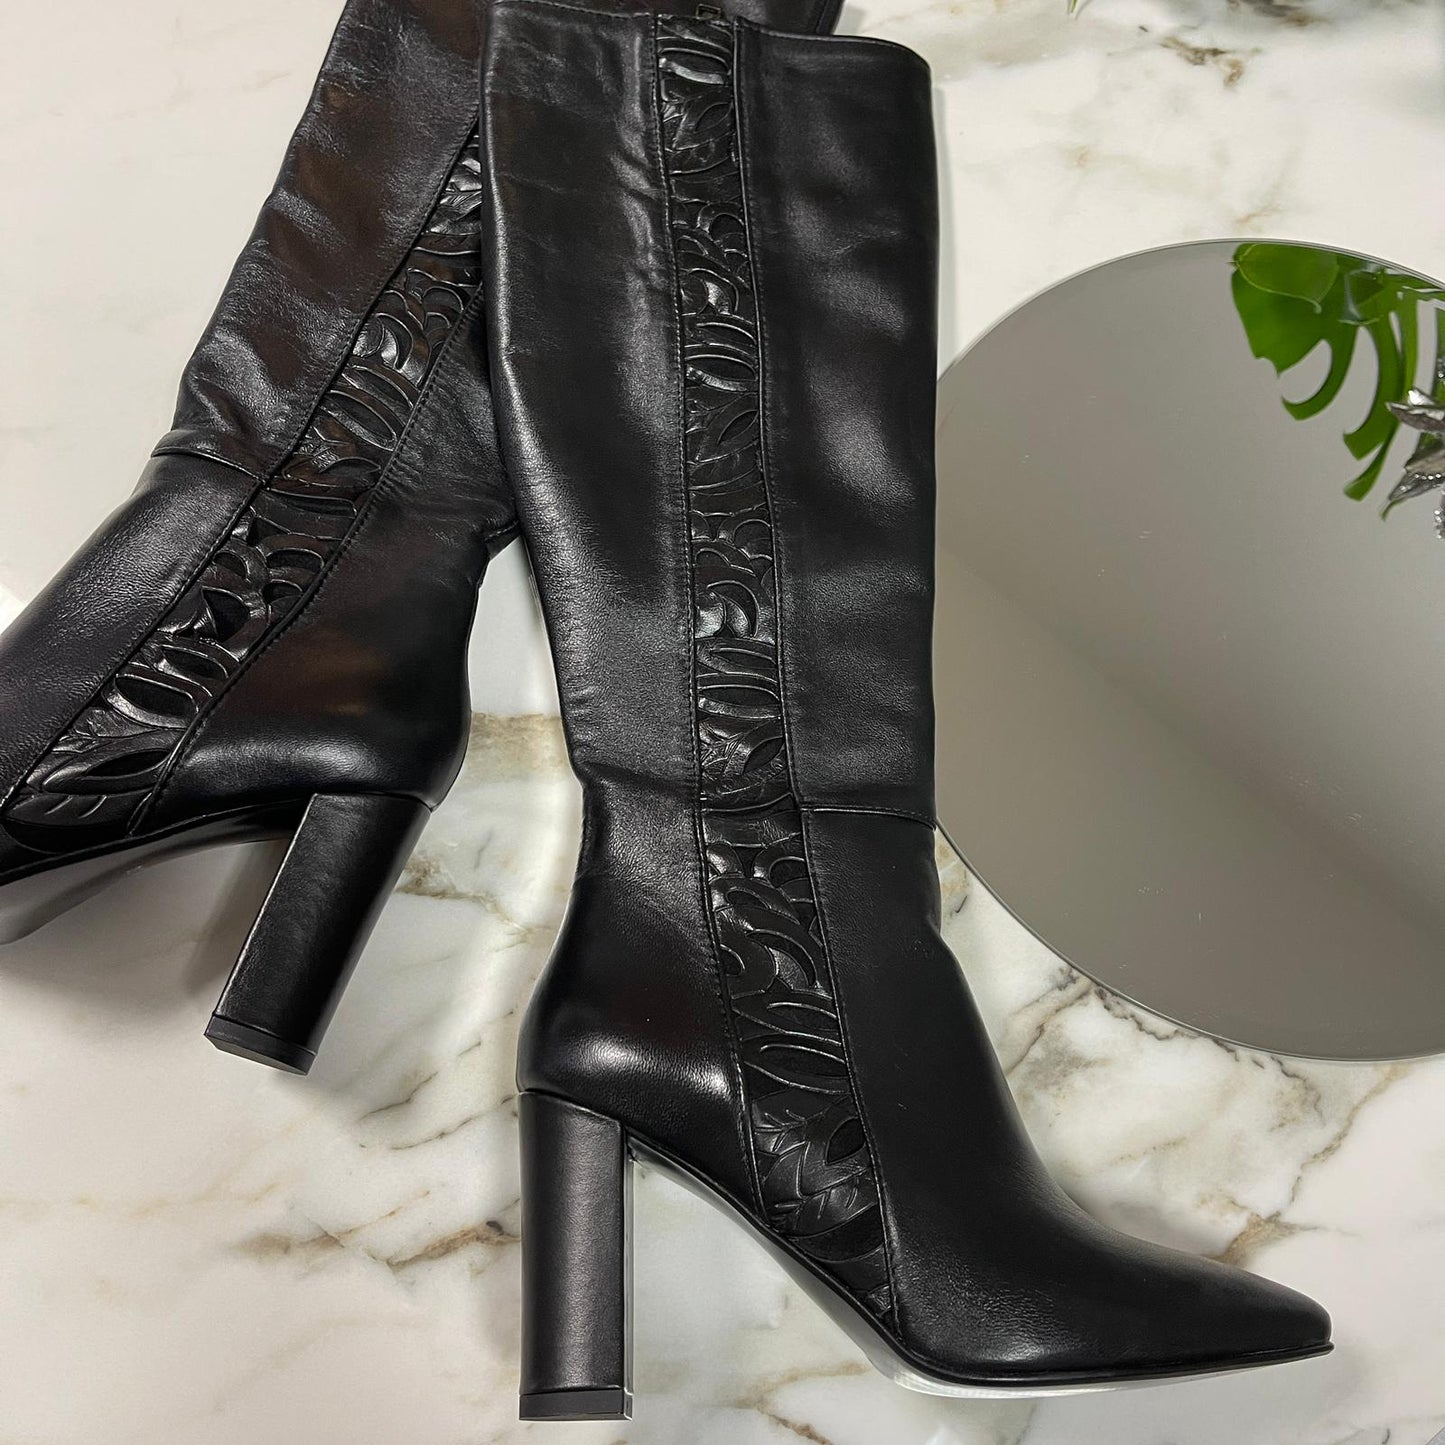 Small size ladies knee heigh boots in black leather